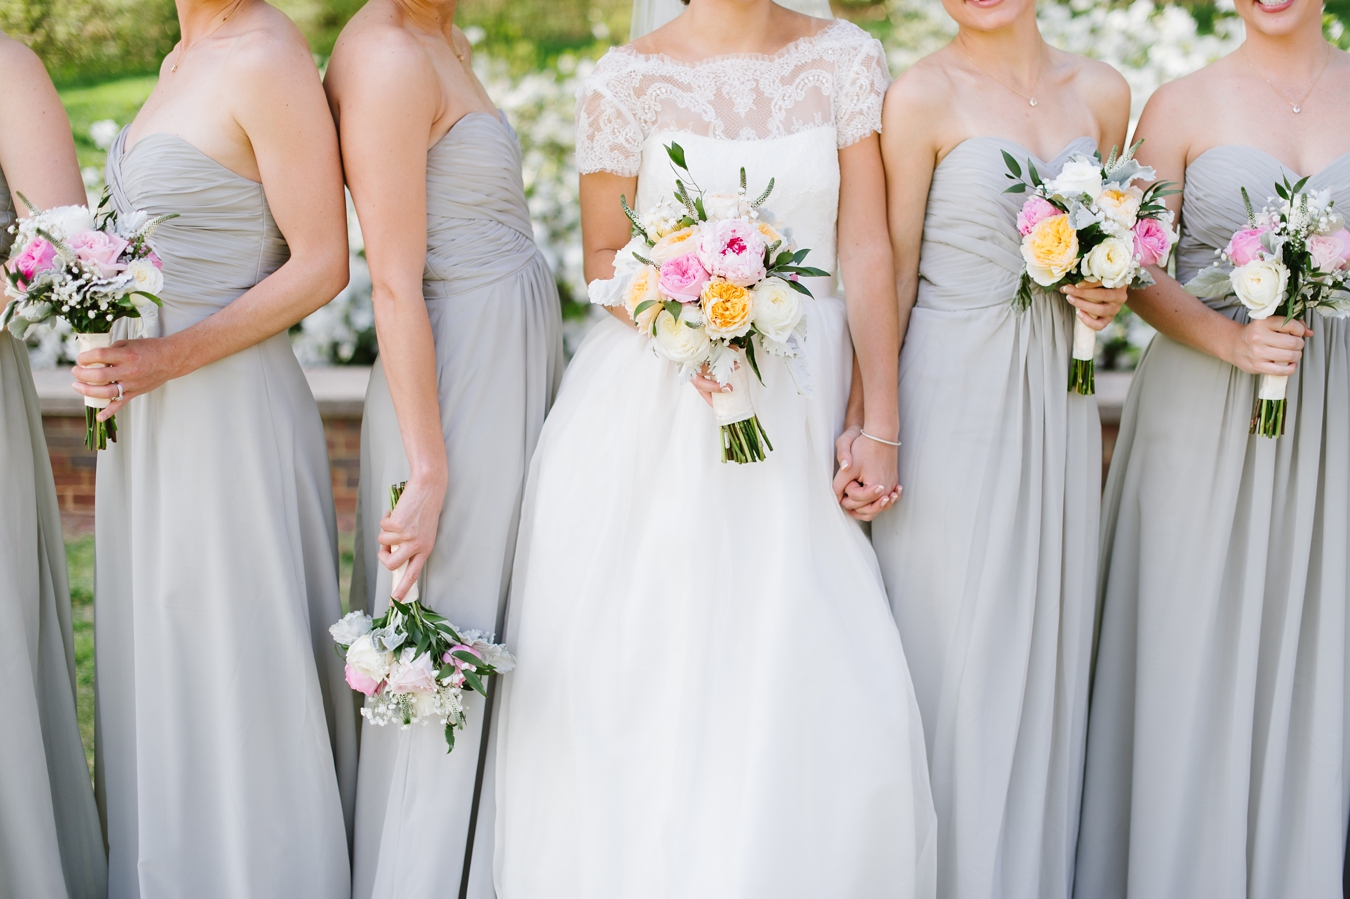 Grey Bridesmaids Dresses and Southern Bouquets | Natalie Franke Photography